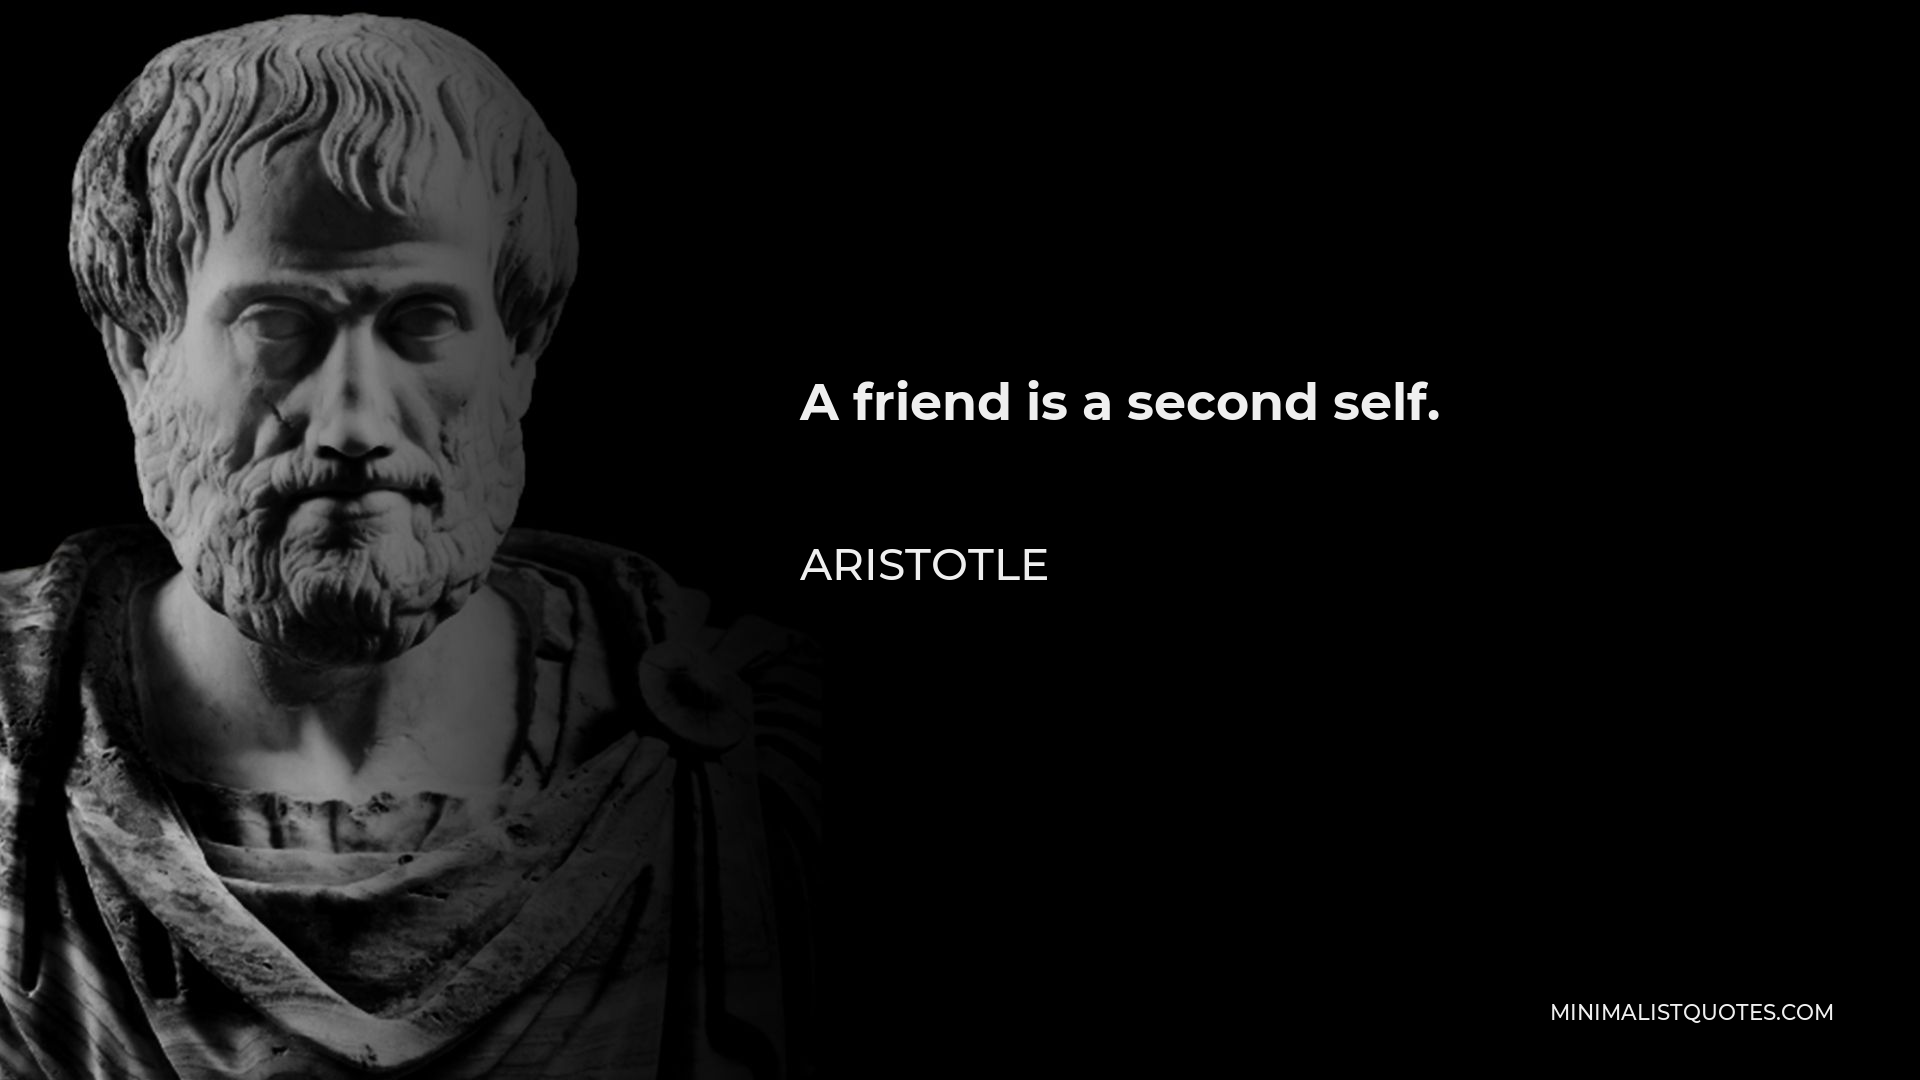 Aristotle Quote - A friend is a second self.